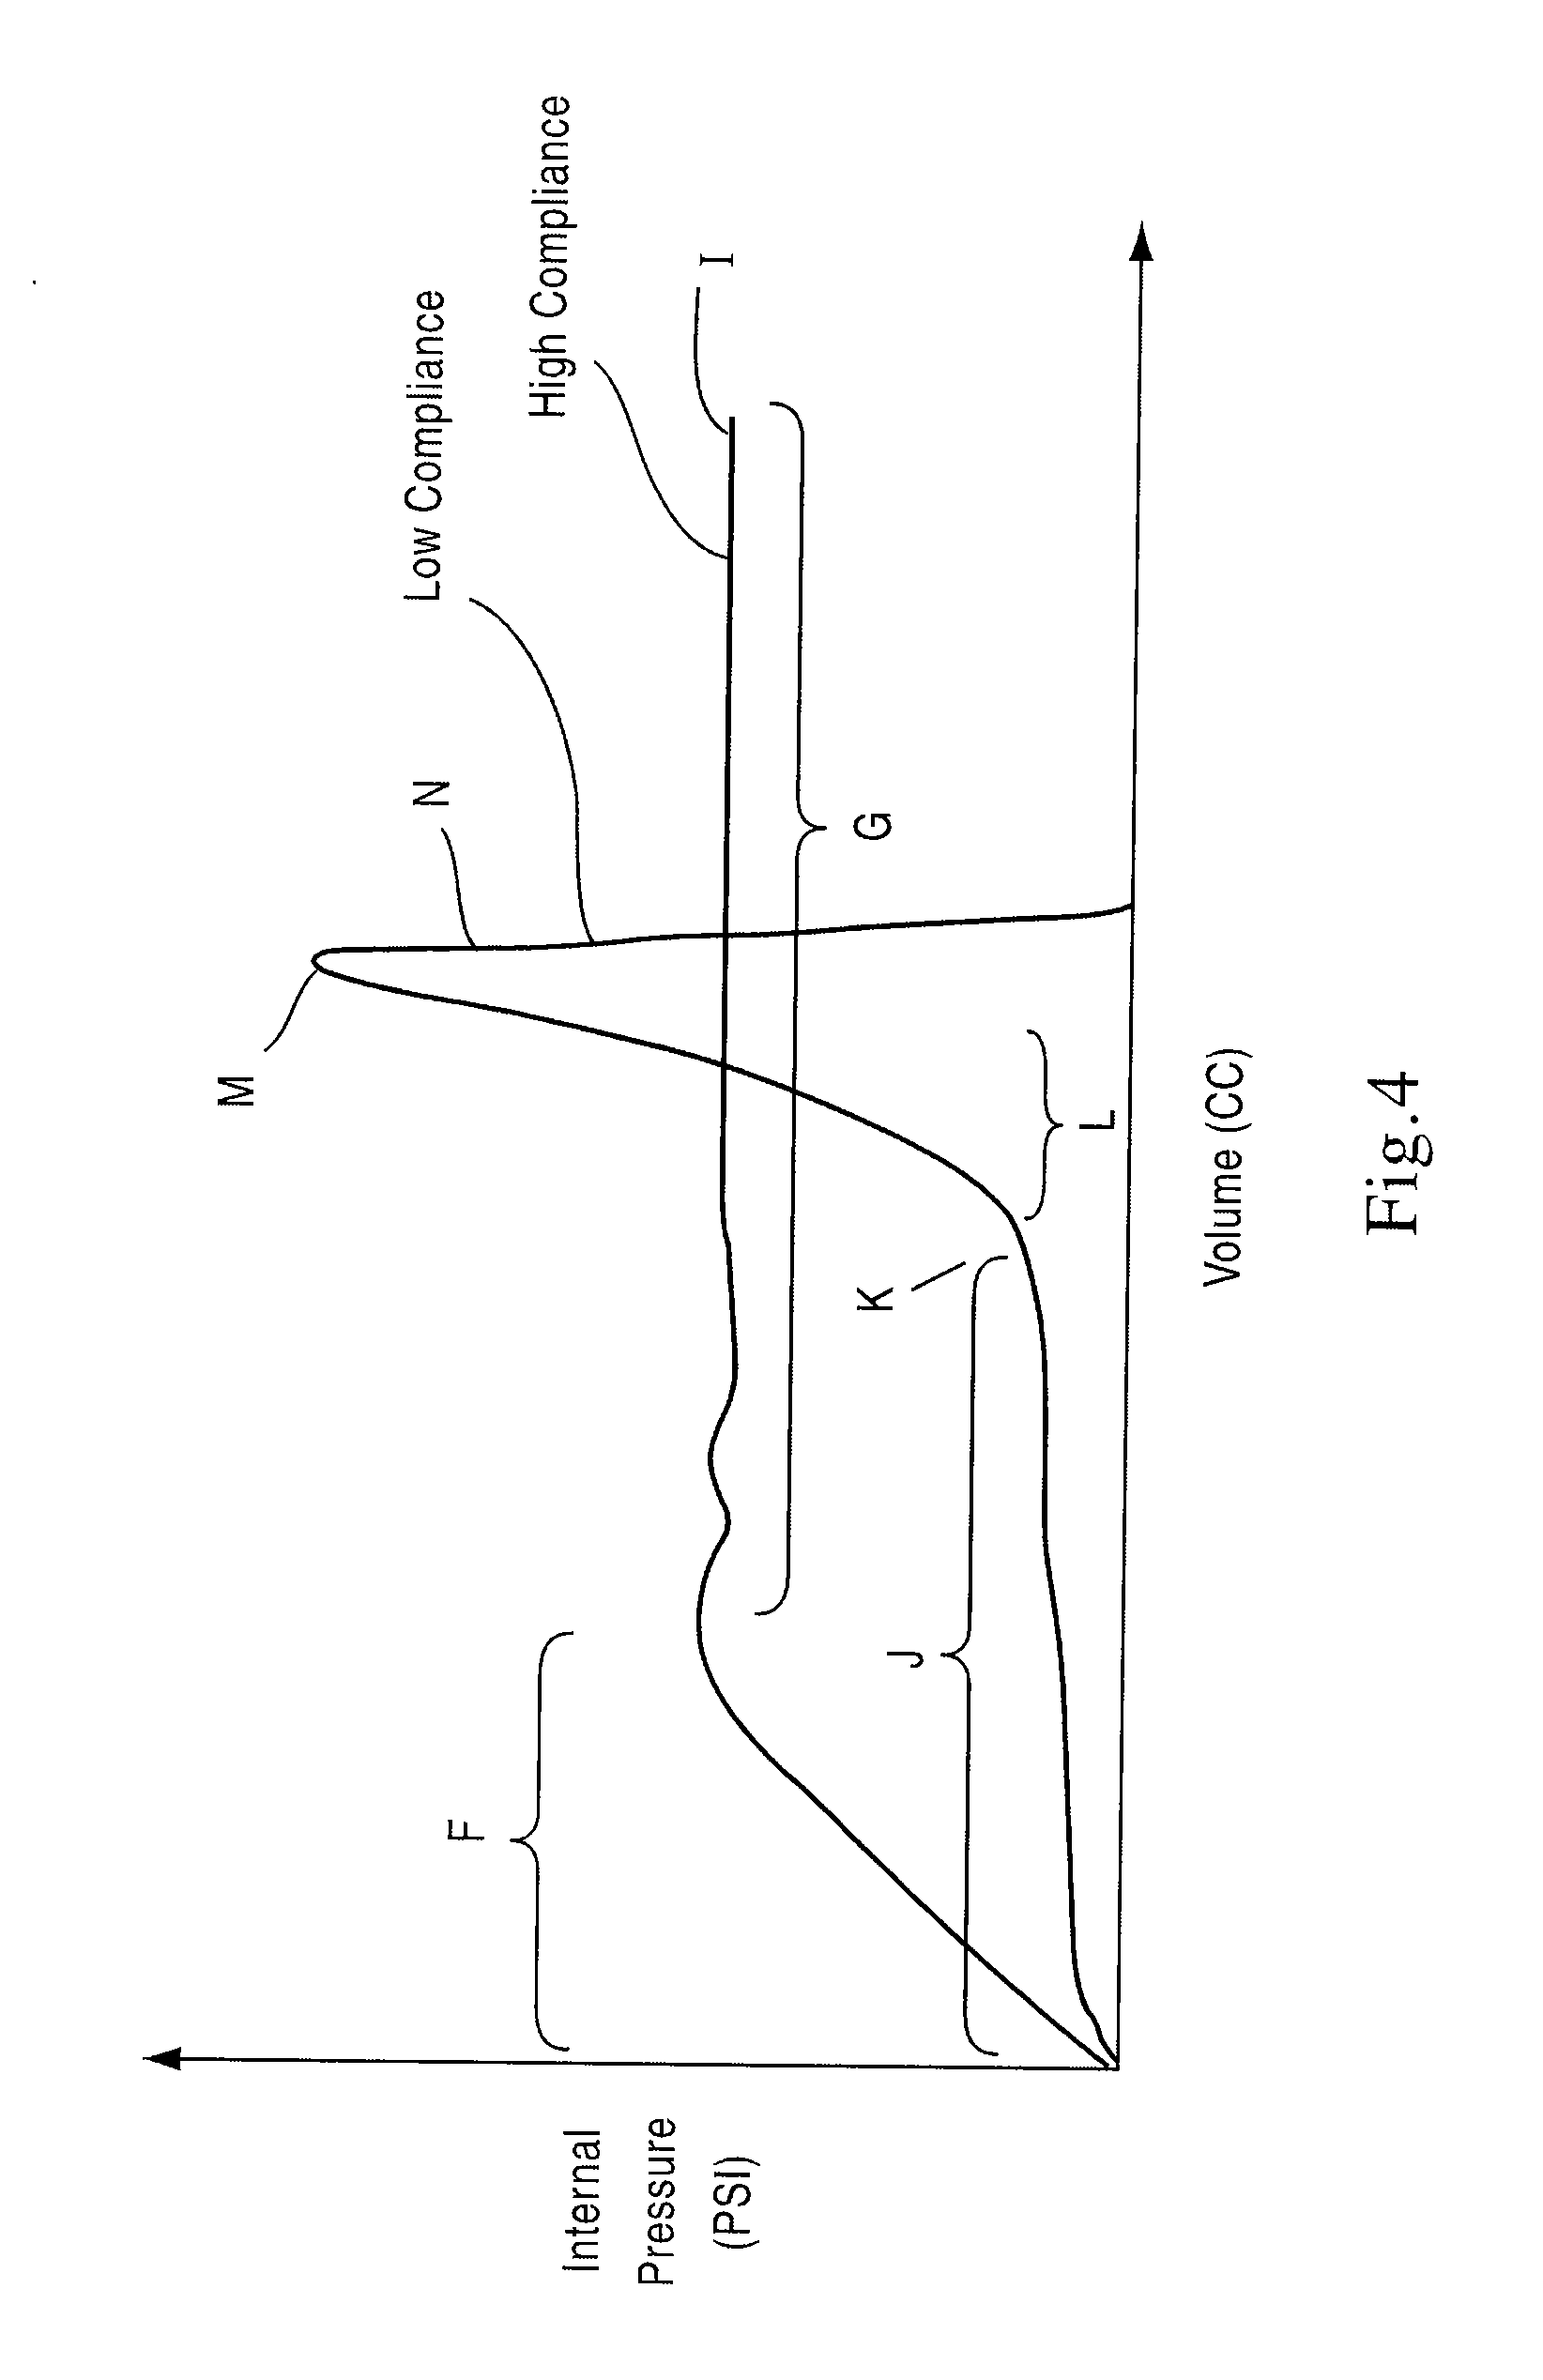 Low-compliance expandable medical device